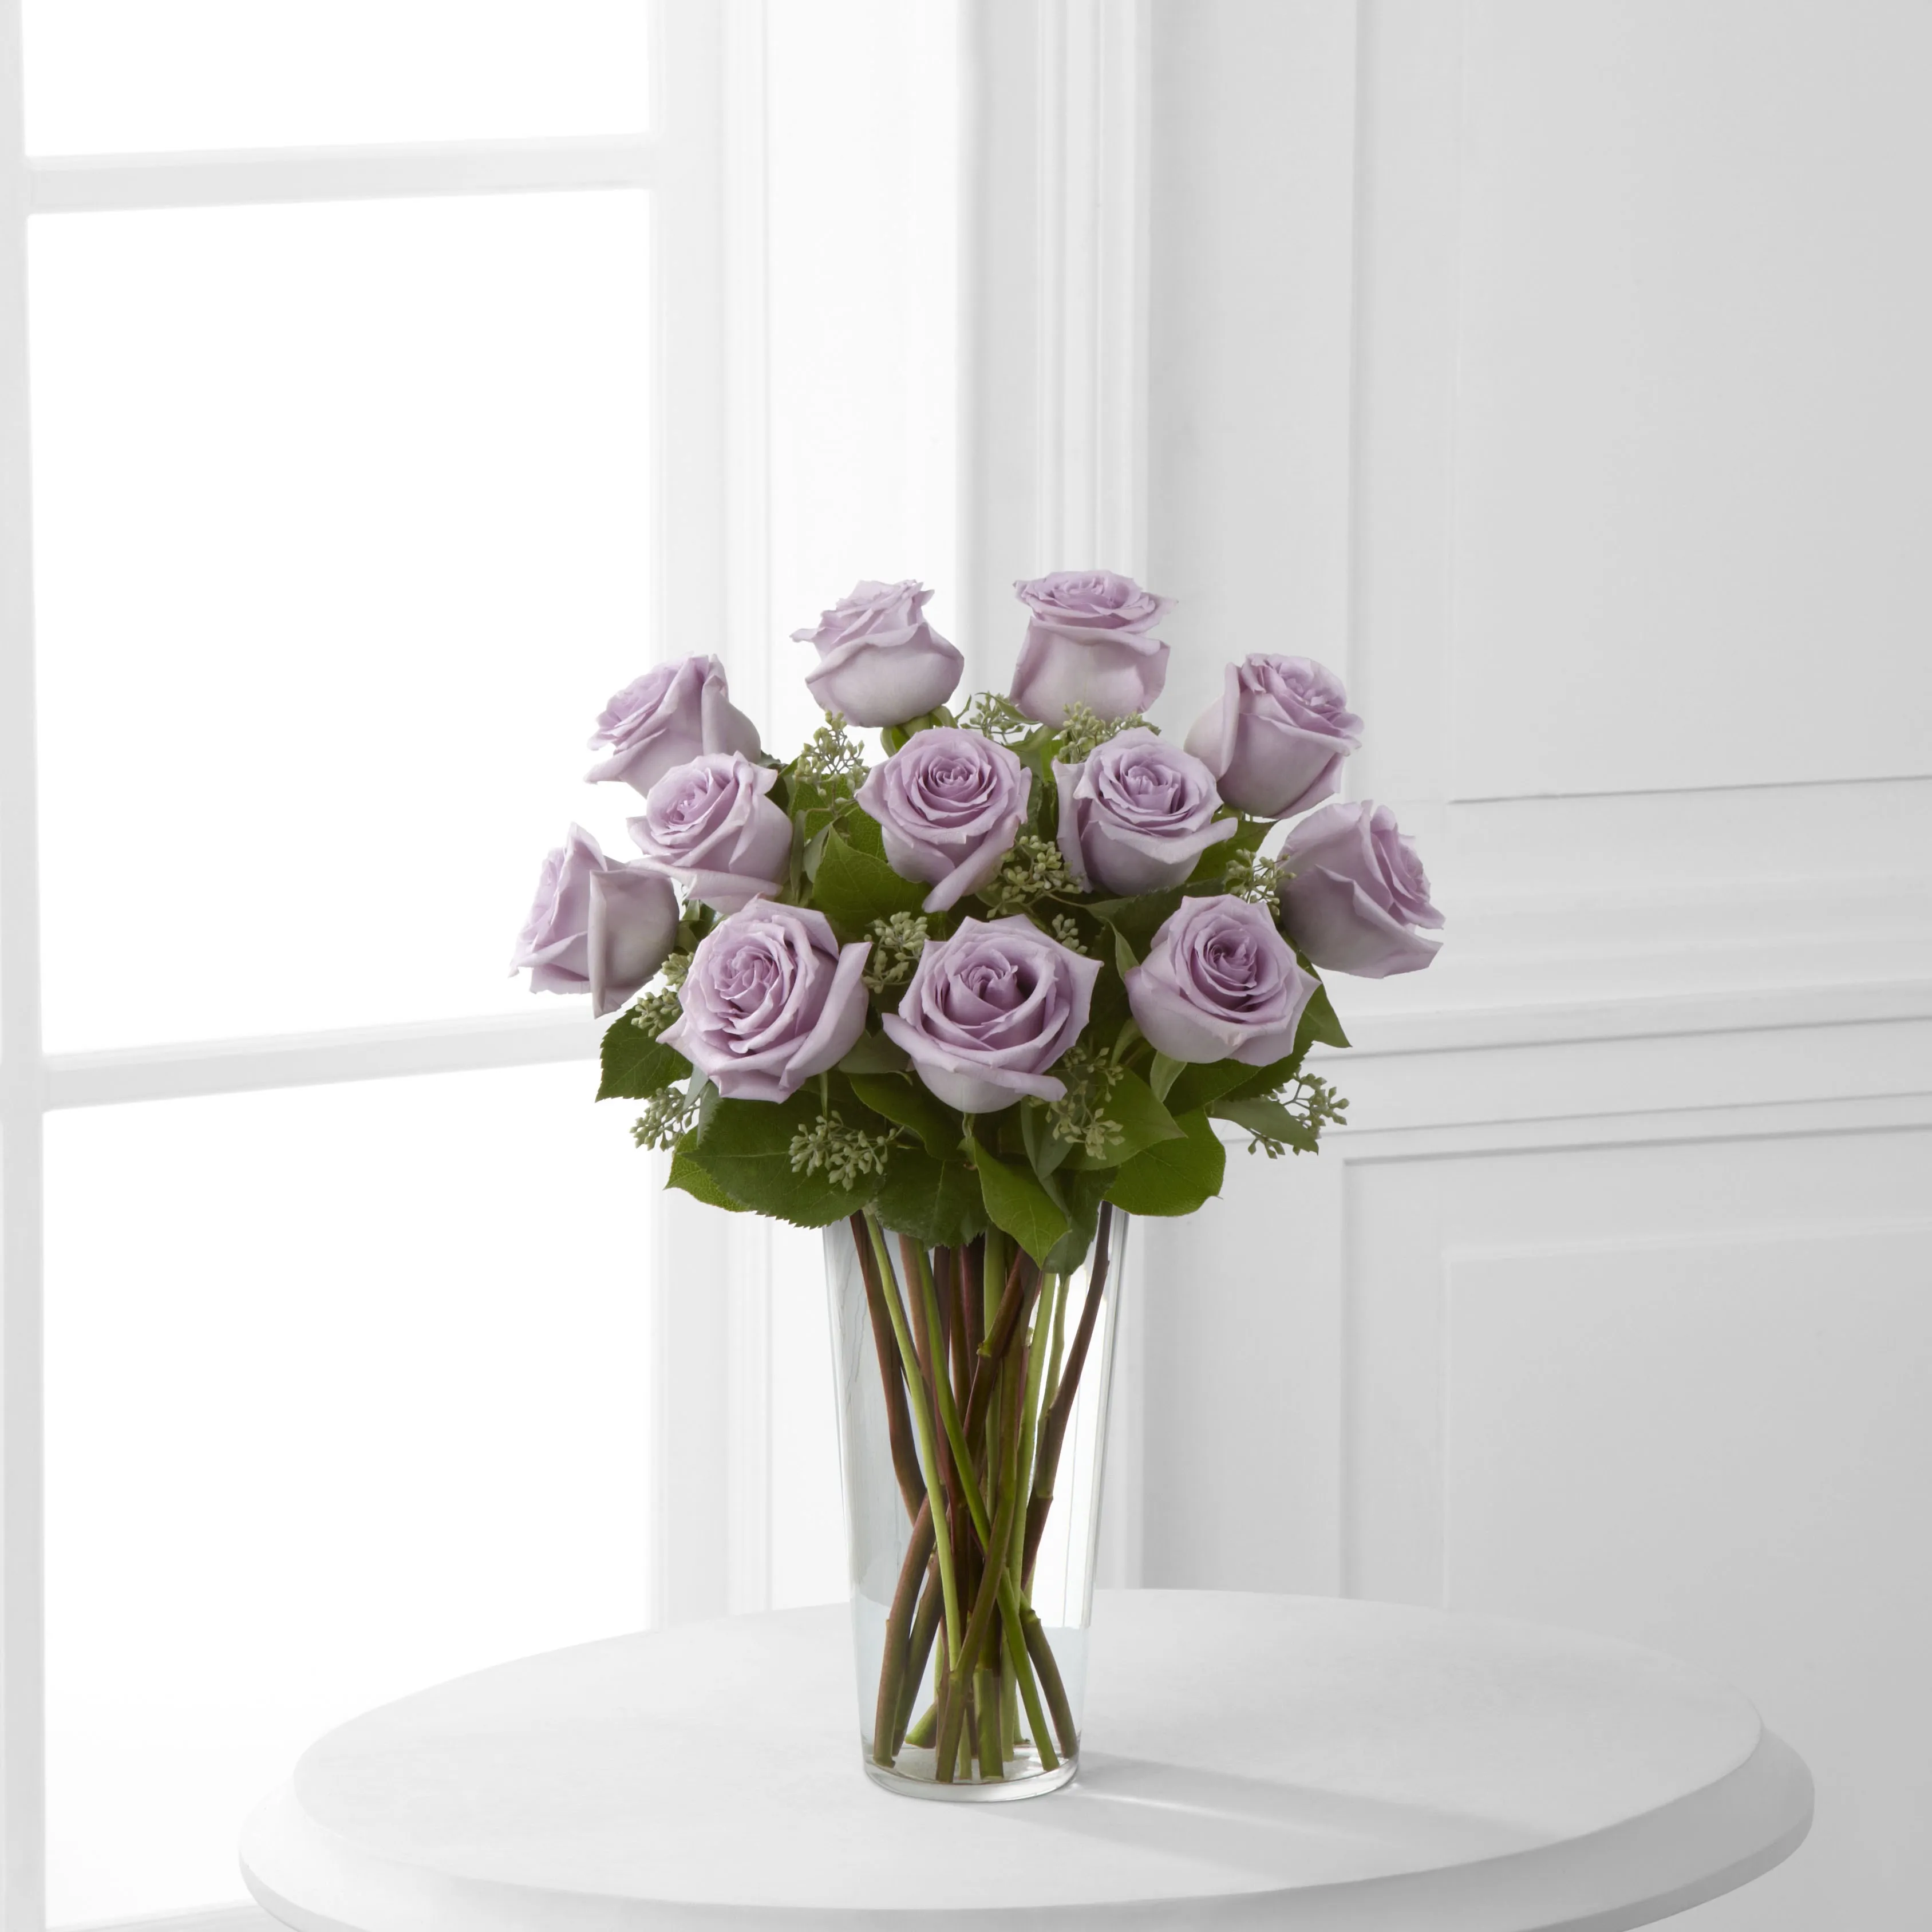 The Lavender Rose Bouquet - VASE INCLUDED - Costa Rica